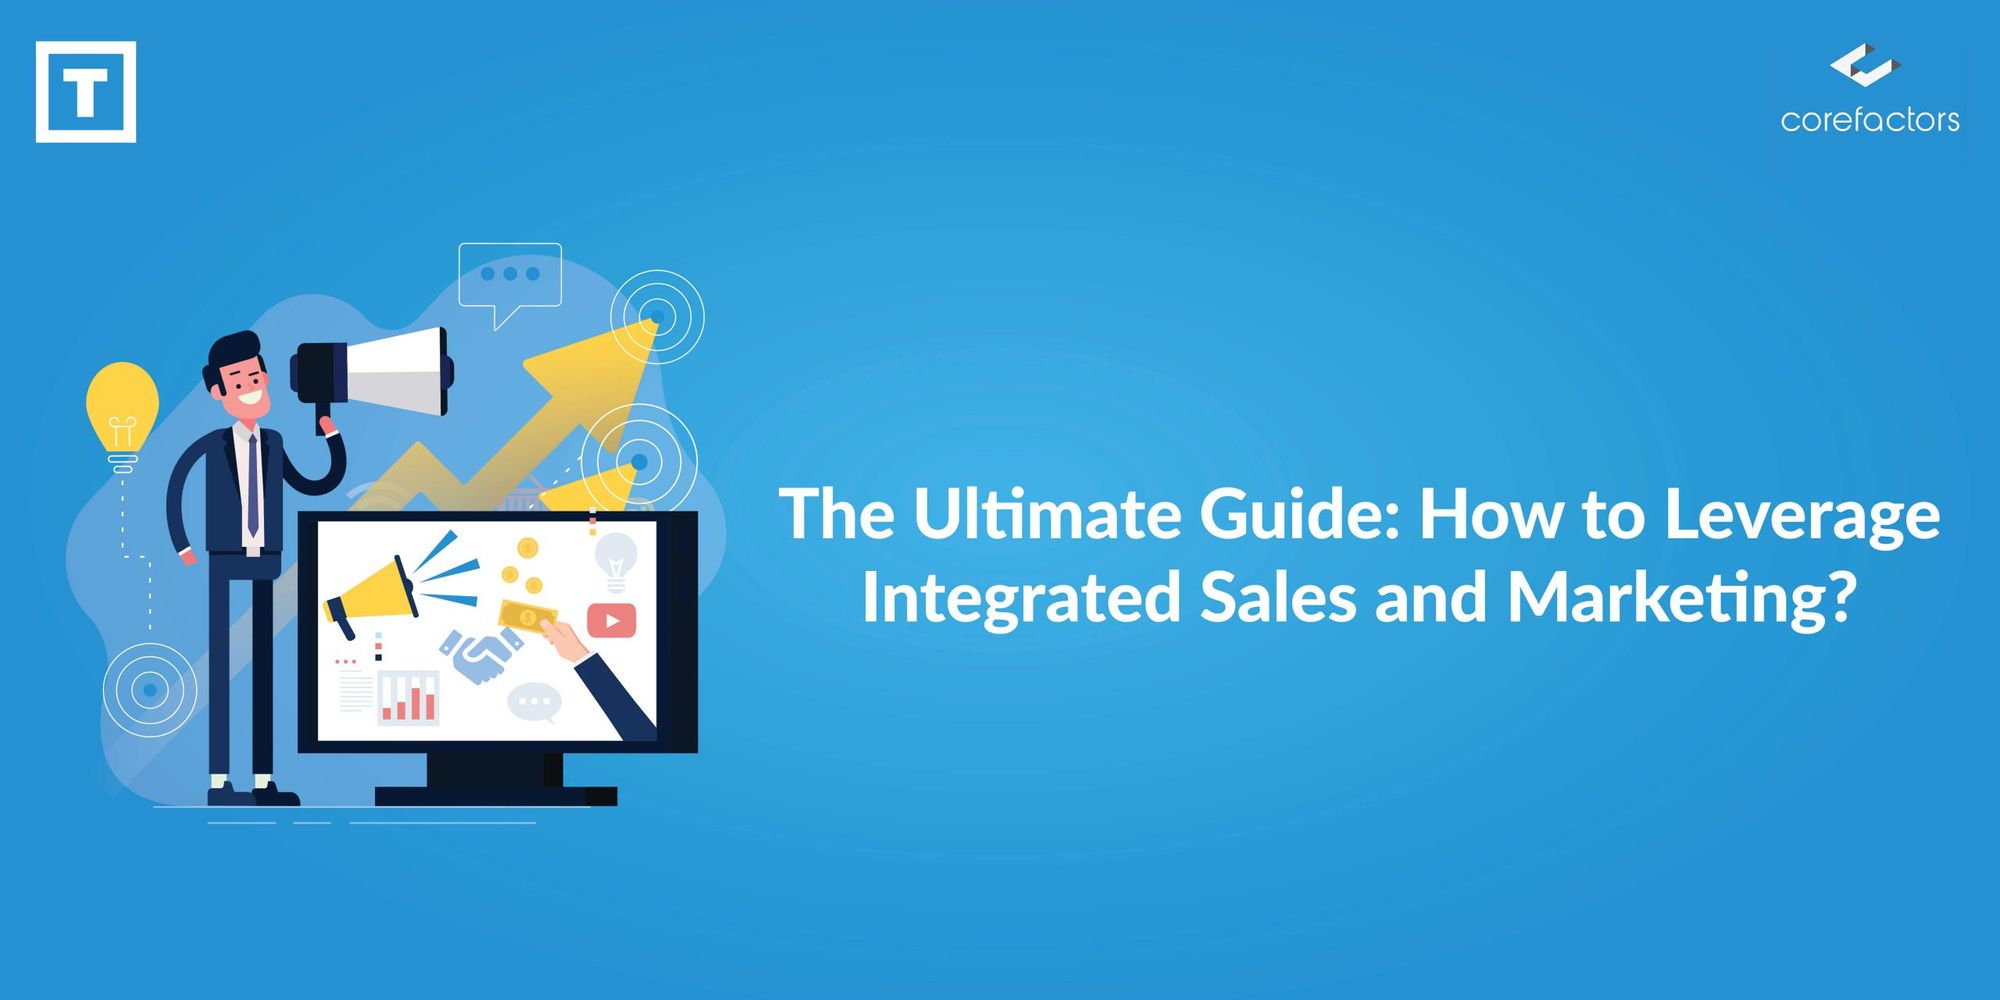 The Ultimate Guide: How to Leverage Integrated Sales and Marketing